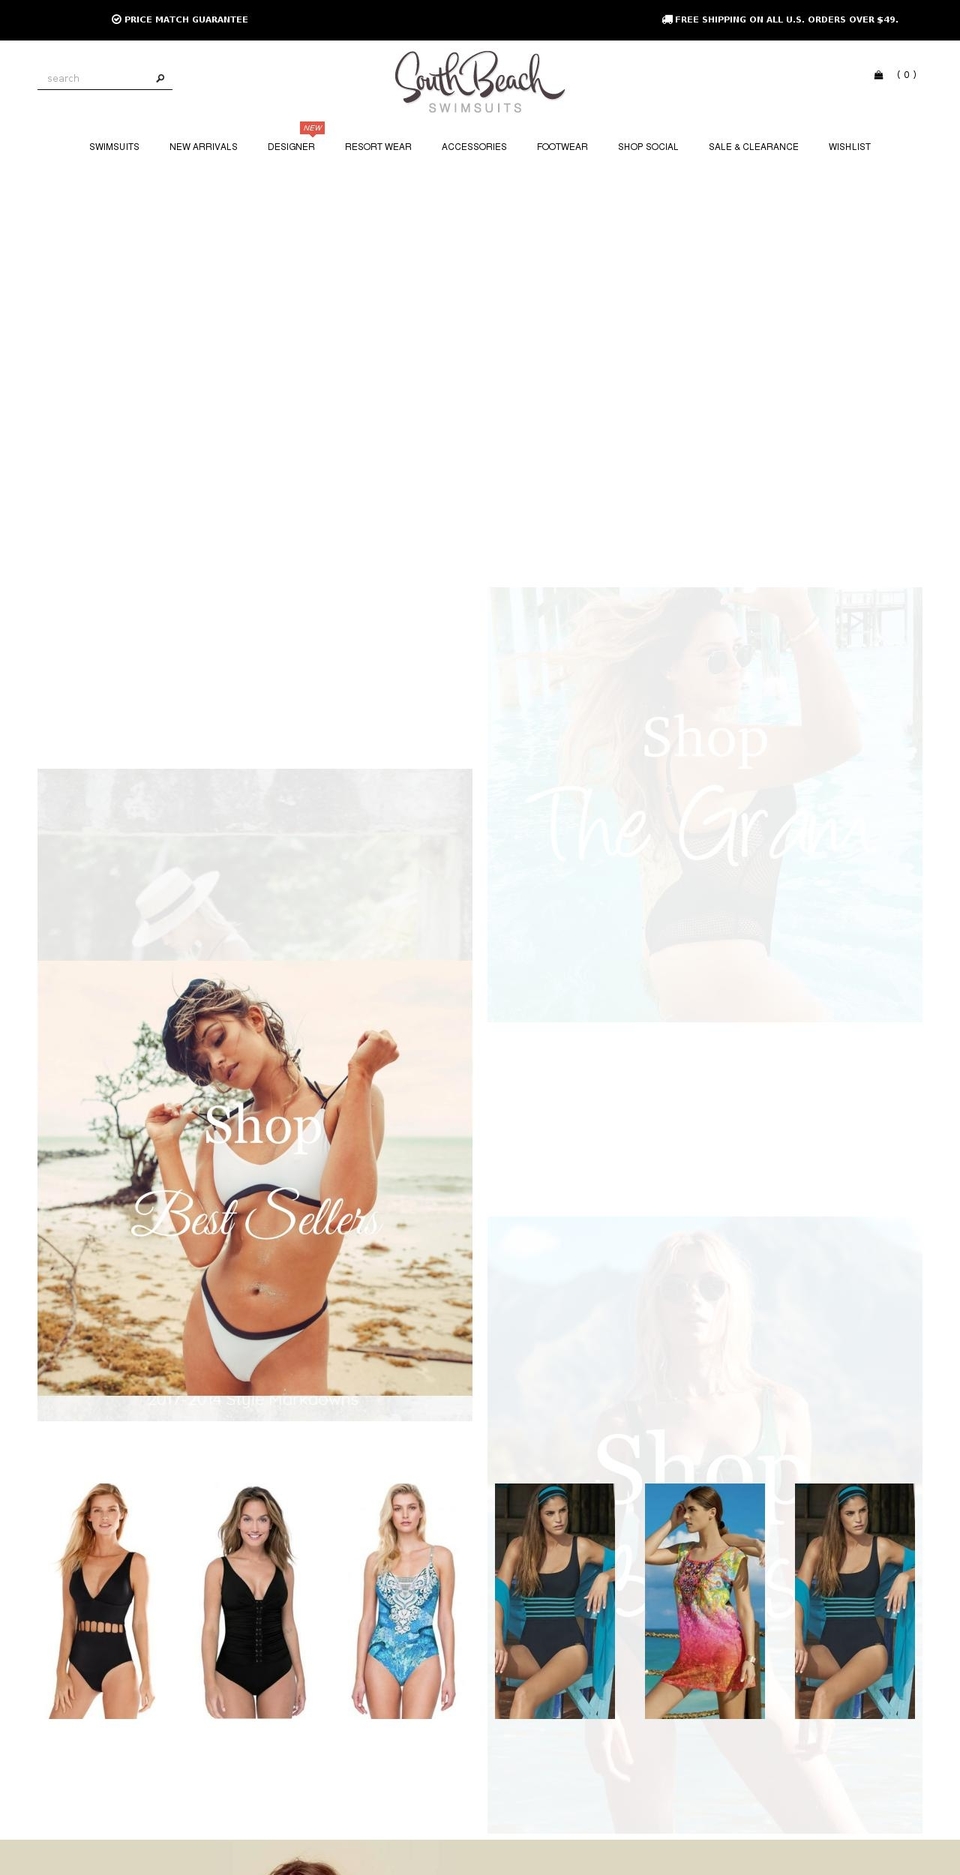 Made With ❤ By Minion Made - Updated Checkout Shopify theme site example southbeachswimsuits.com